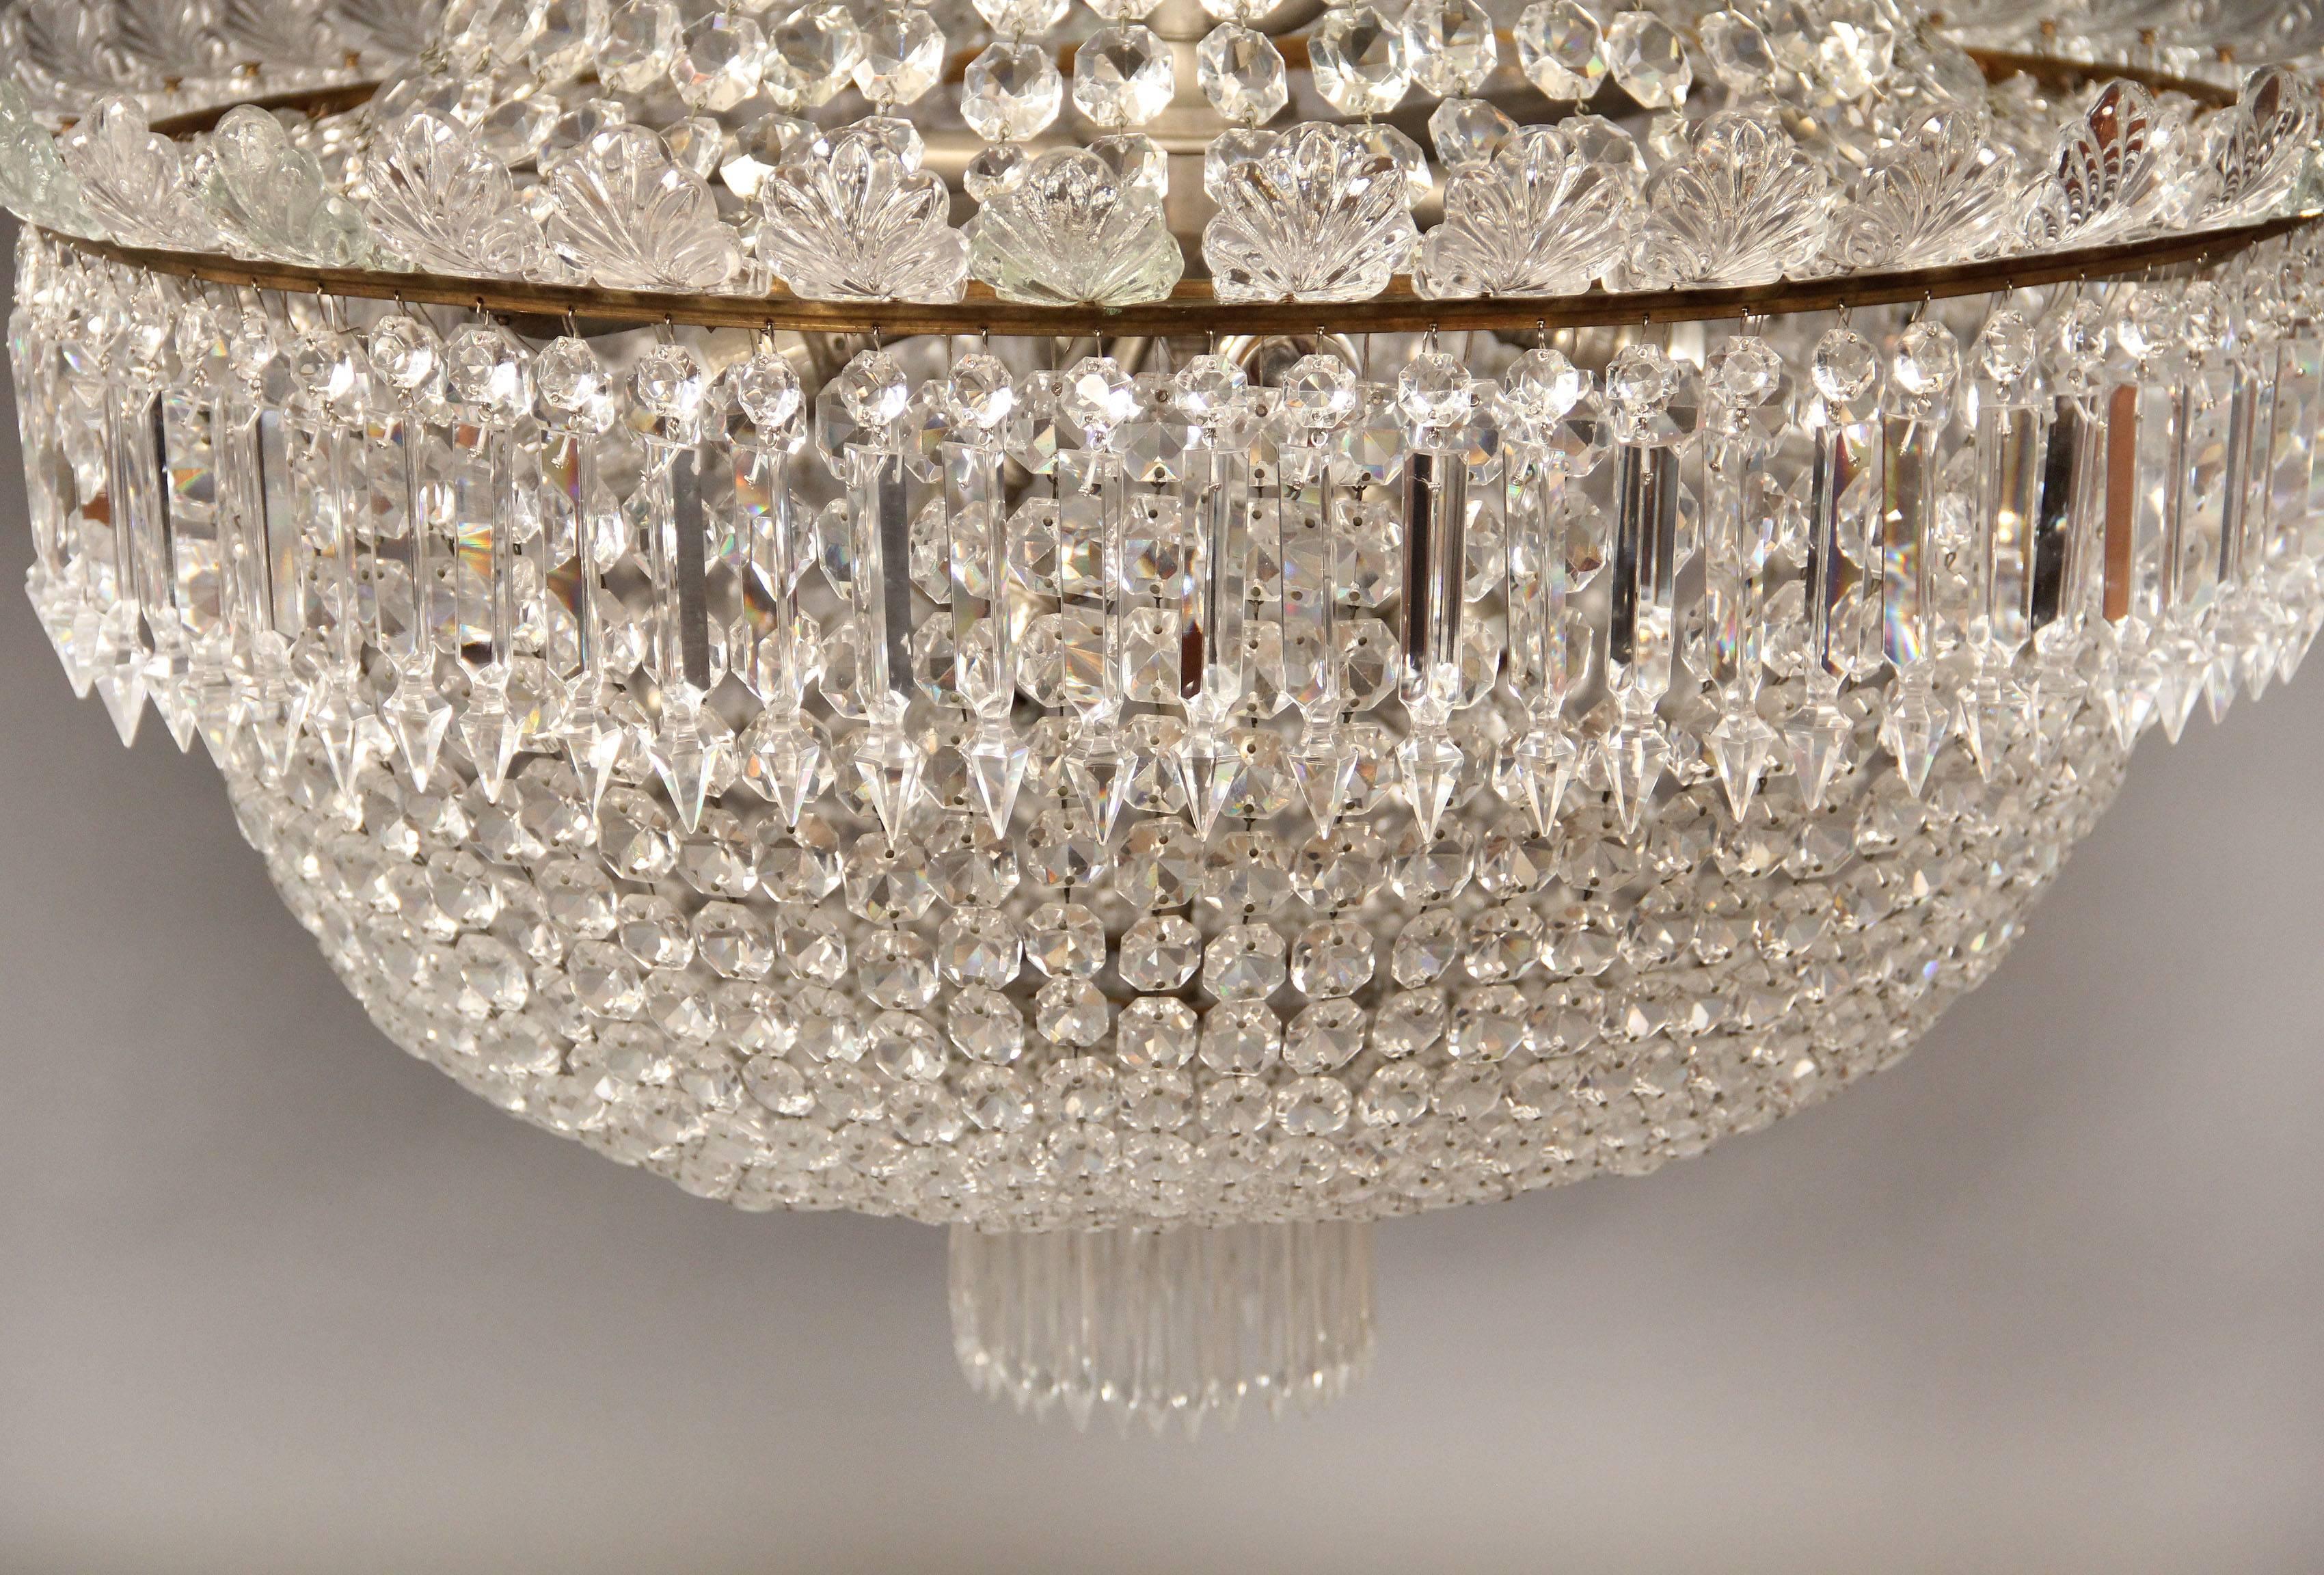 Gilt Exceptional Pair of Early 20th Century Baccarat Chandeliers